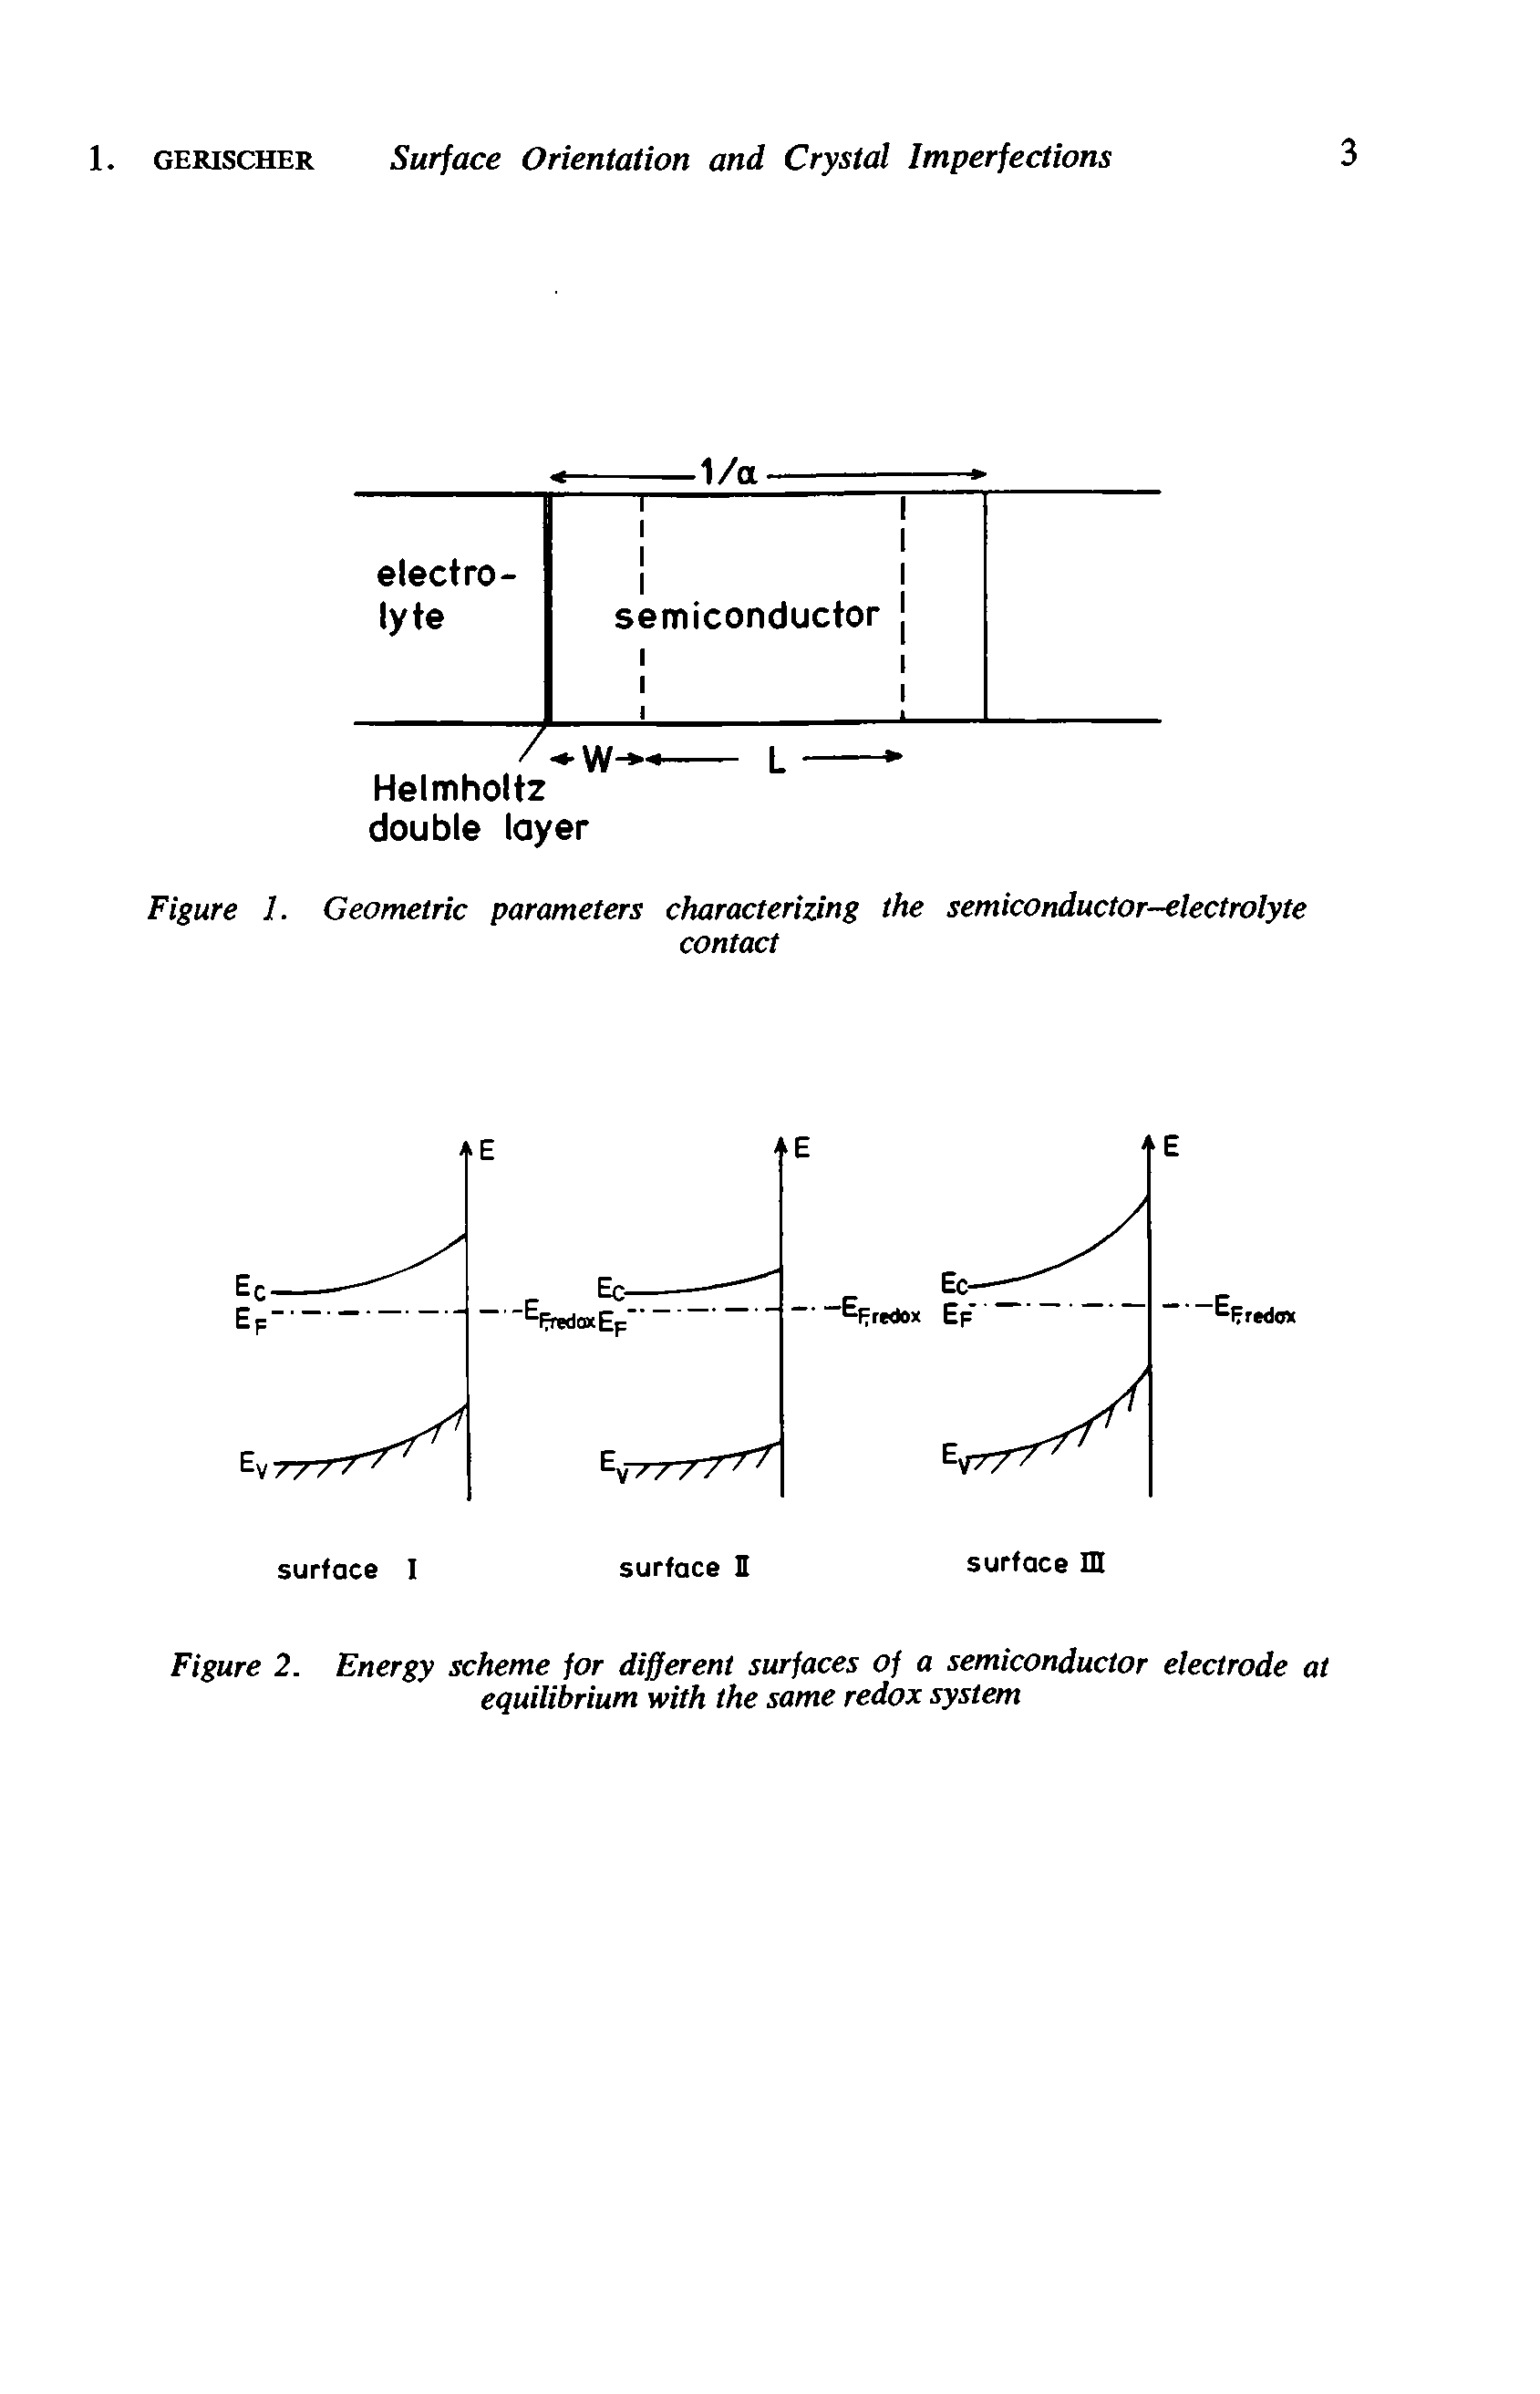 Figure 2. Energy scheme for different surfaces of a semiconductor electrode equilibrium with the same redox system...